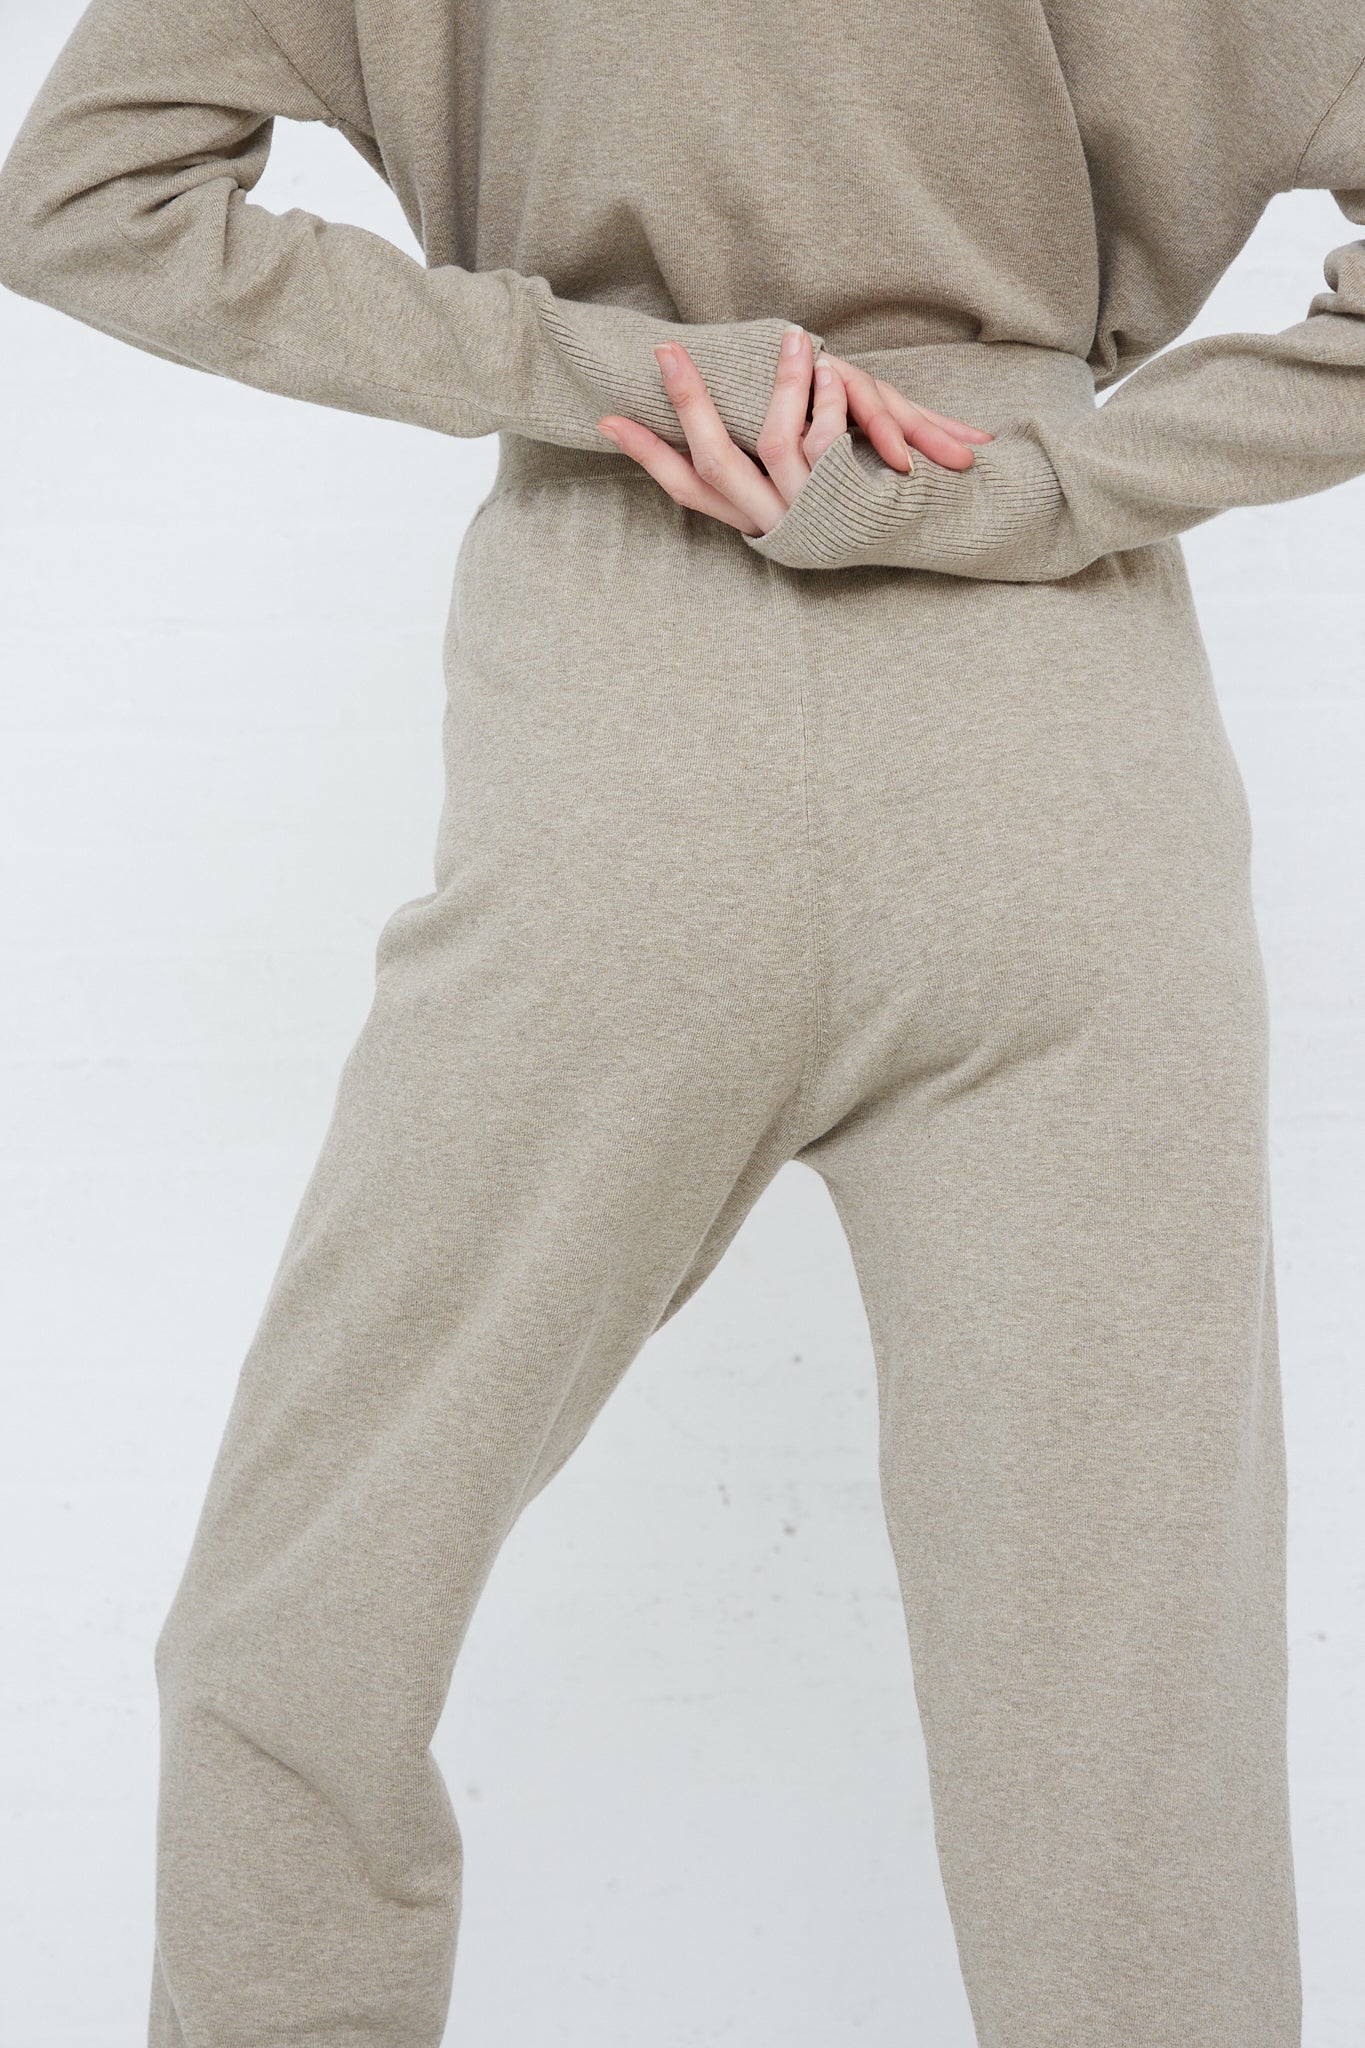 The model is wearing the Lauren Manoogian Base Pant in Stone Melange, a relaxed fit pant in soft pima cotton. Back view and up close. Model's arms are crossed behind her back.